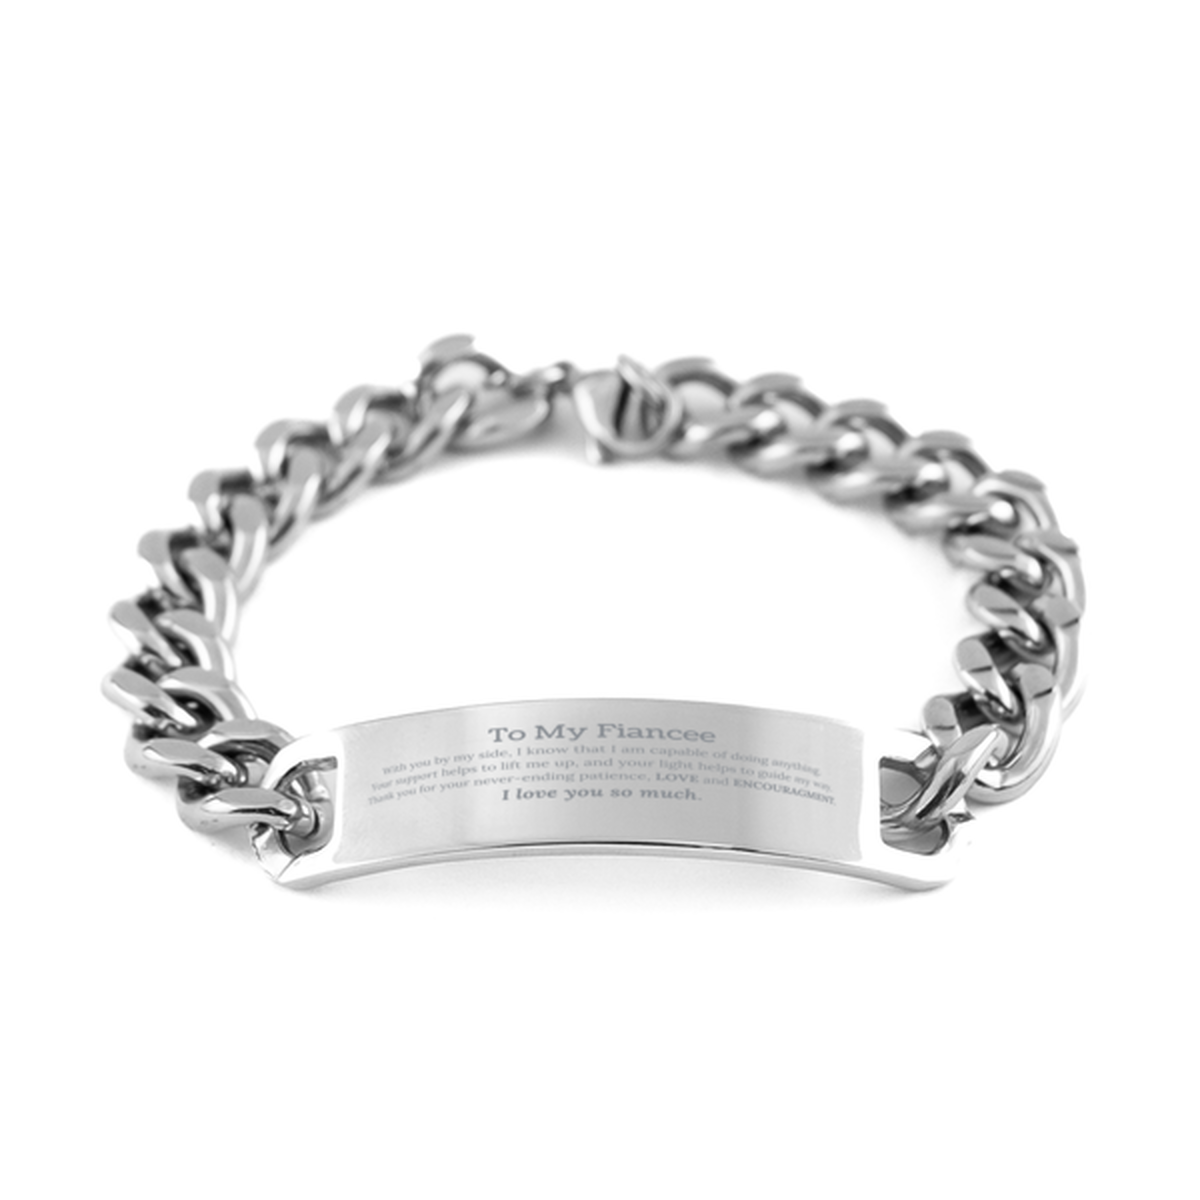 Appreciation Fiancee Cuban Chain Stainless Steel Bracelet Gifts, To My Fiancee Birthday Christmas Wedding Keepsake Gifts for Fiancee With you by my side, I know that I am capable of doing anything. I love you so much